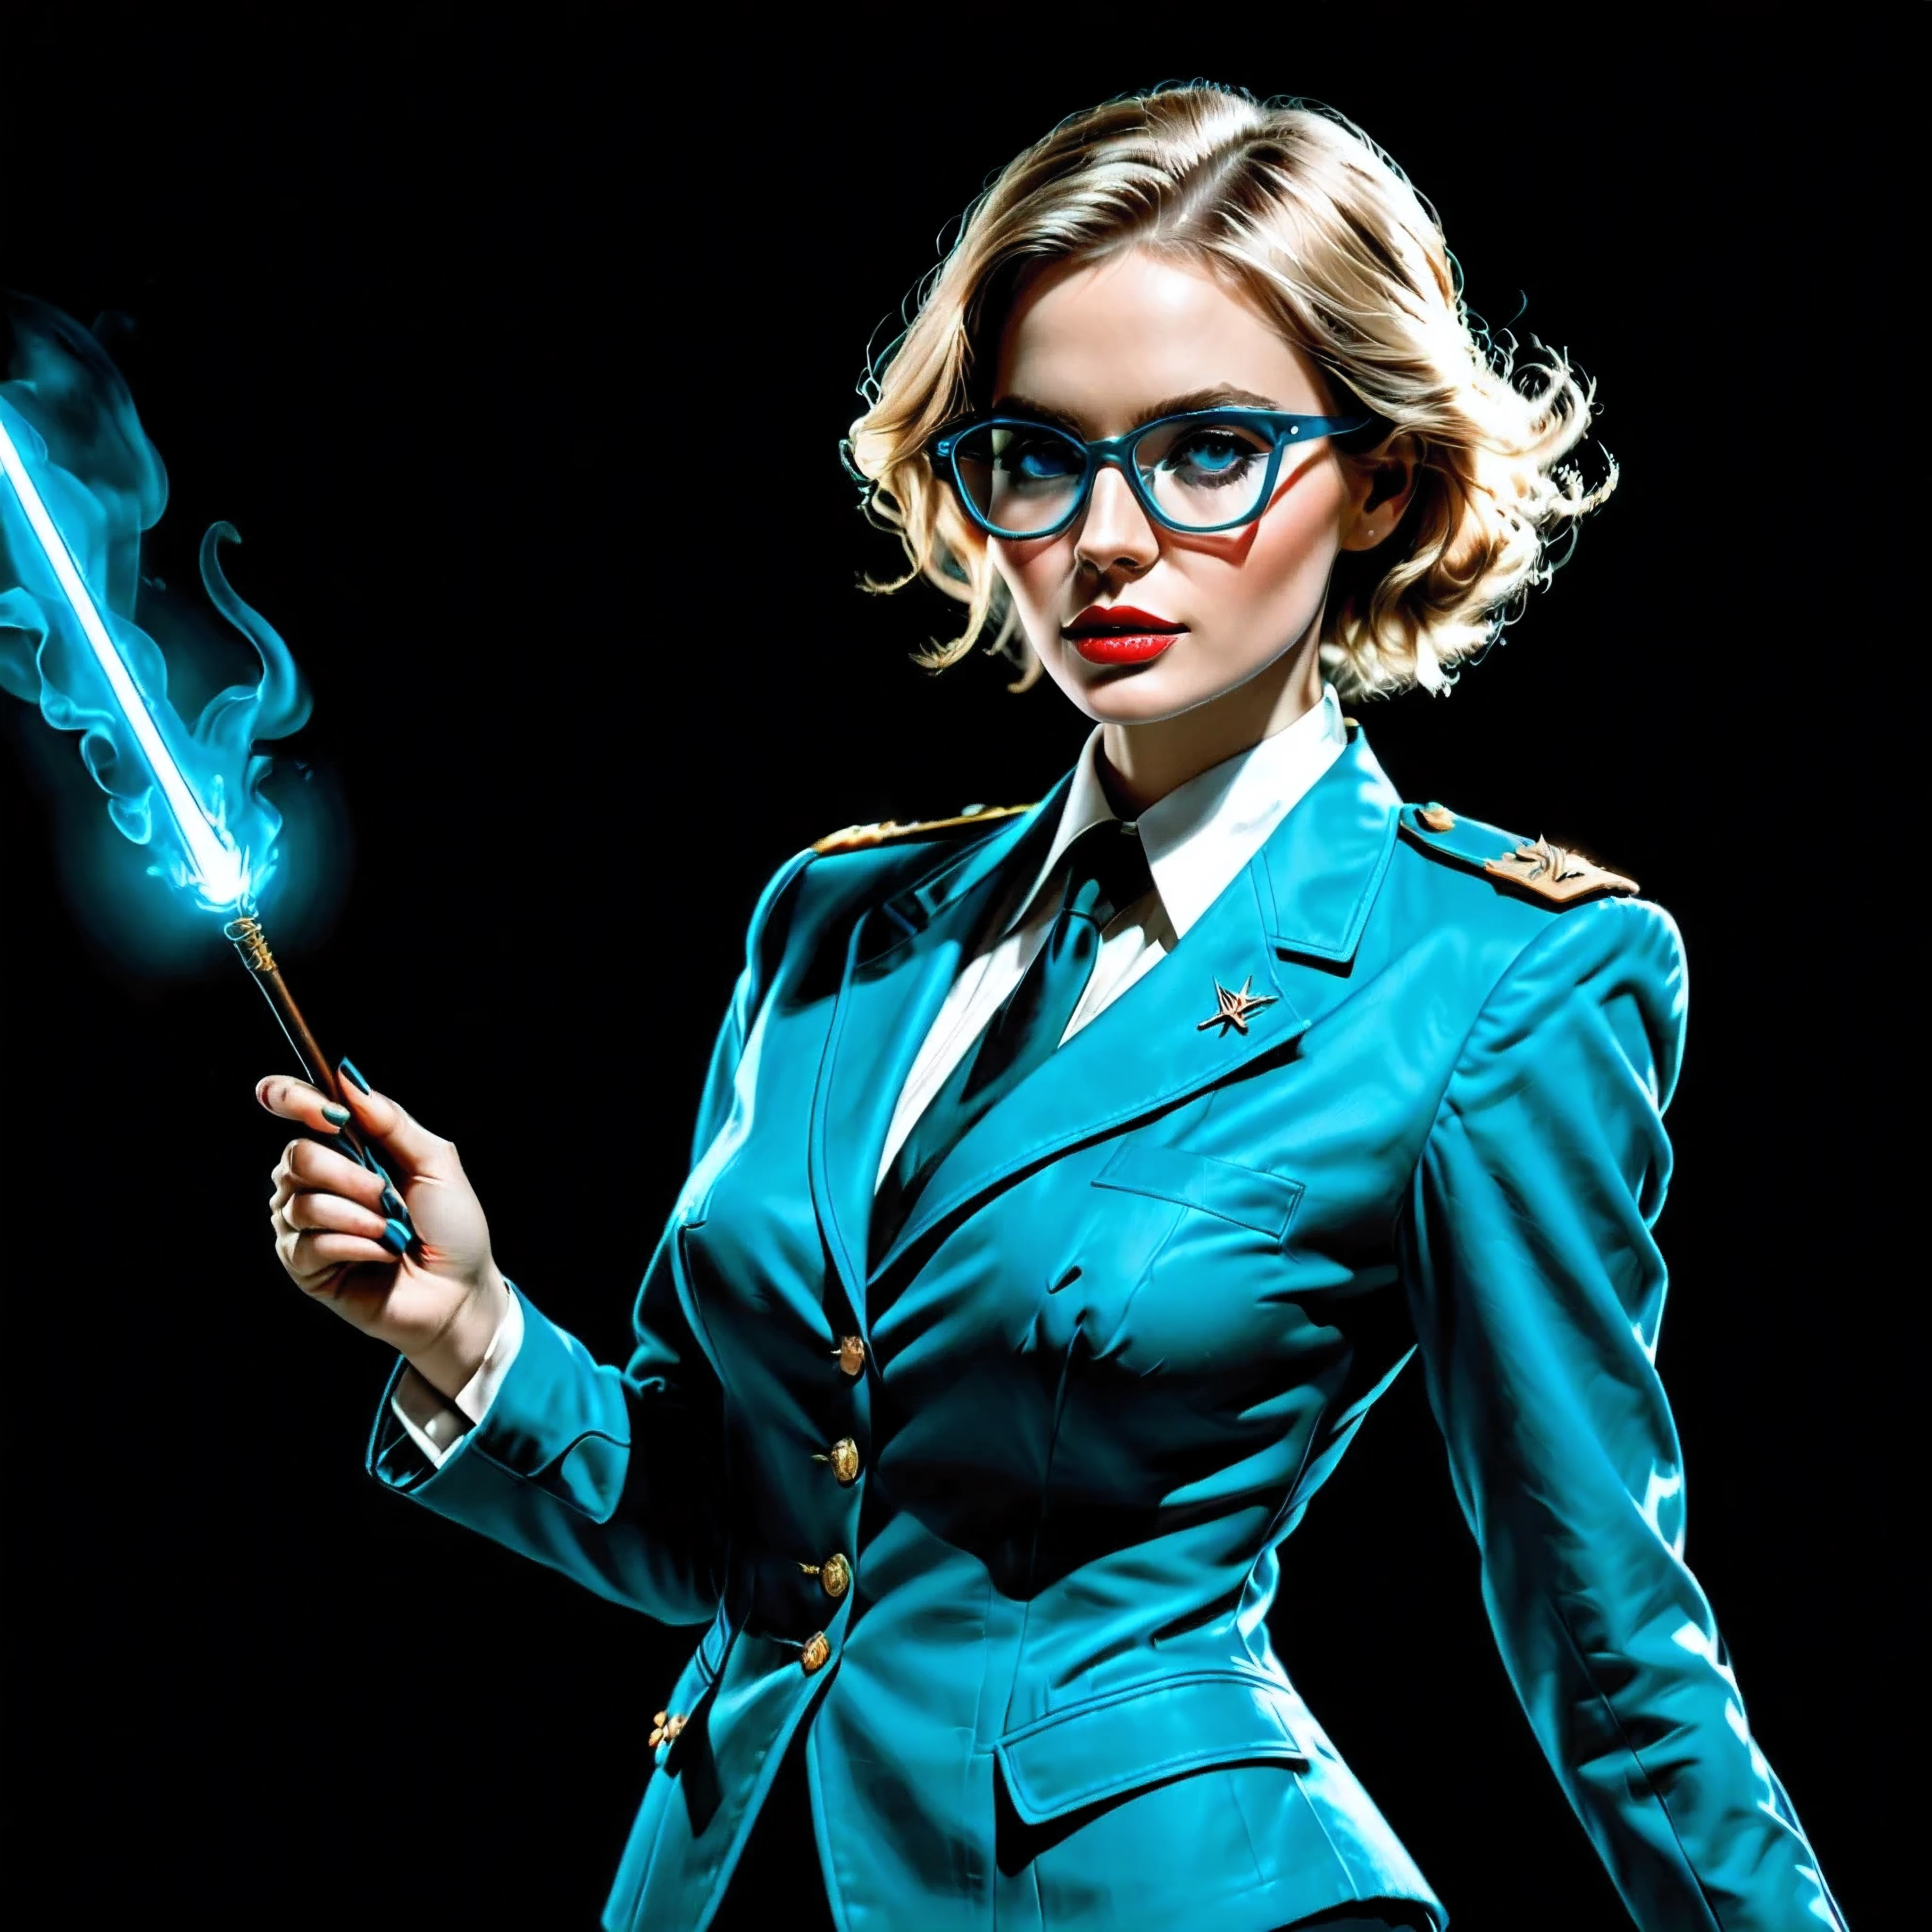 ((Full body):1.2),((Selective color):1.1), Drawing of a Female Bureaucrat in her Official Uniform, Glasses, magic wand with blue glow, smooth lines, fine art piece, Express expressions and postures through ink contrast, emphasize light, shadow and space. figurative art, (best quality, 4K, 8k, high resolution,masterpiece:1.2) ,(actual, photoactual, photo-actual:1.37).